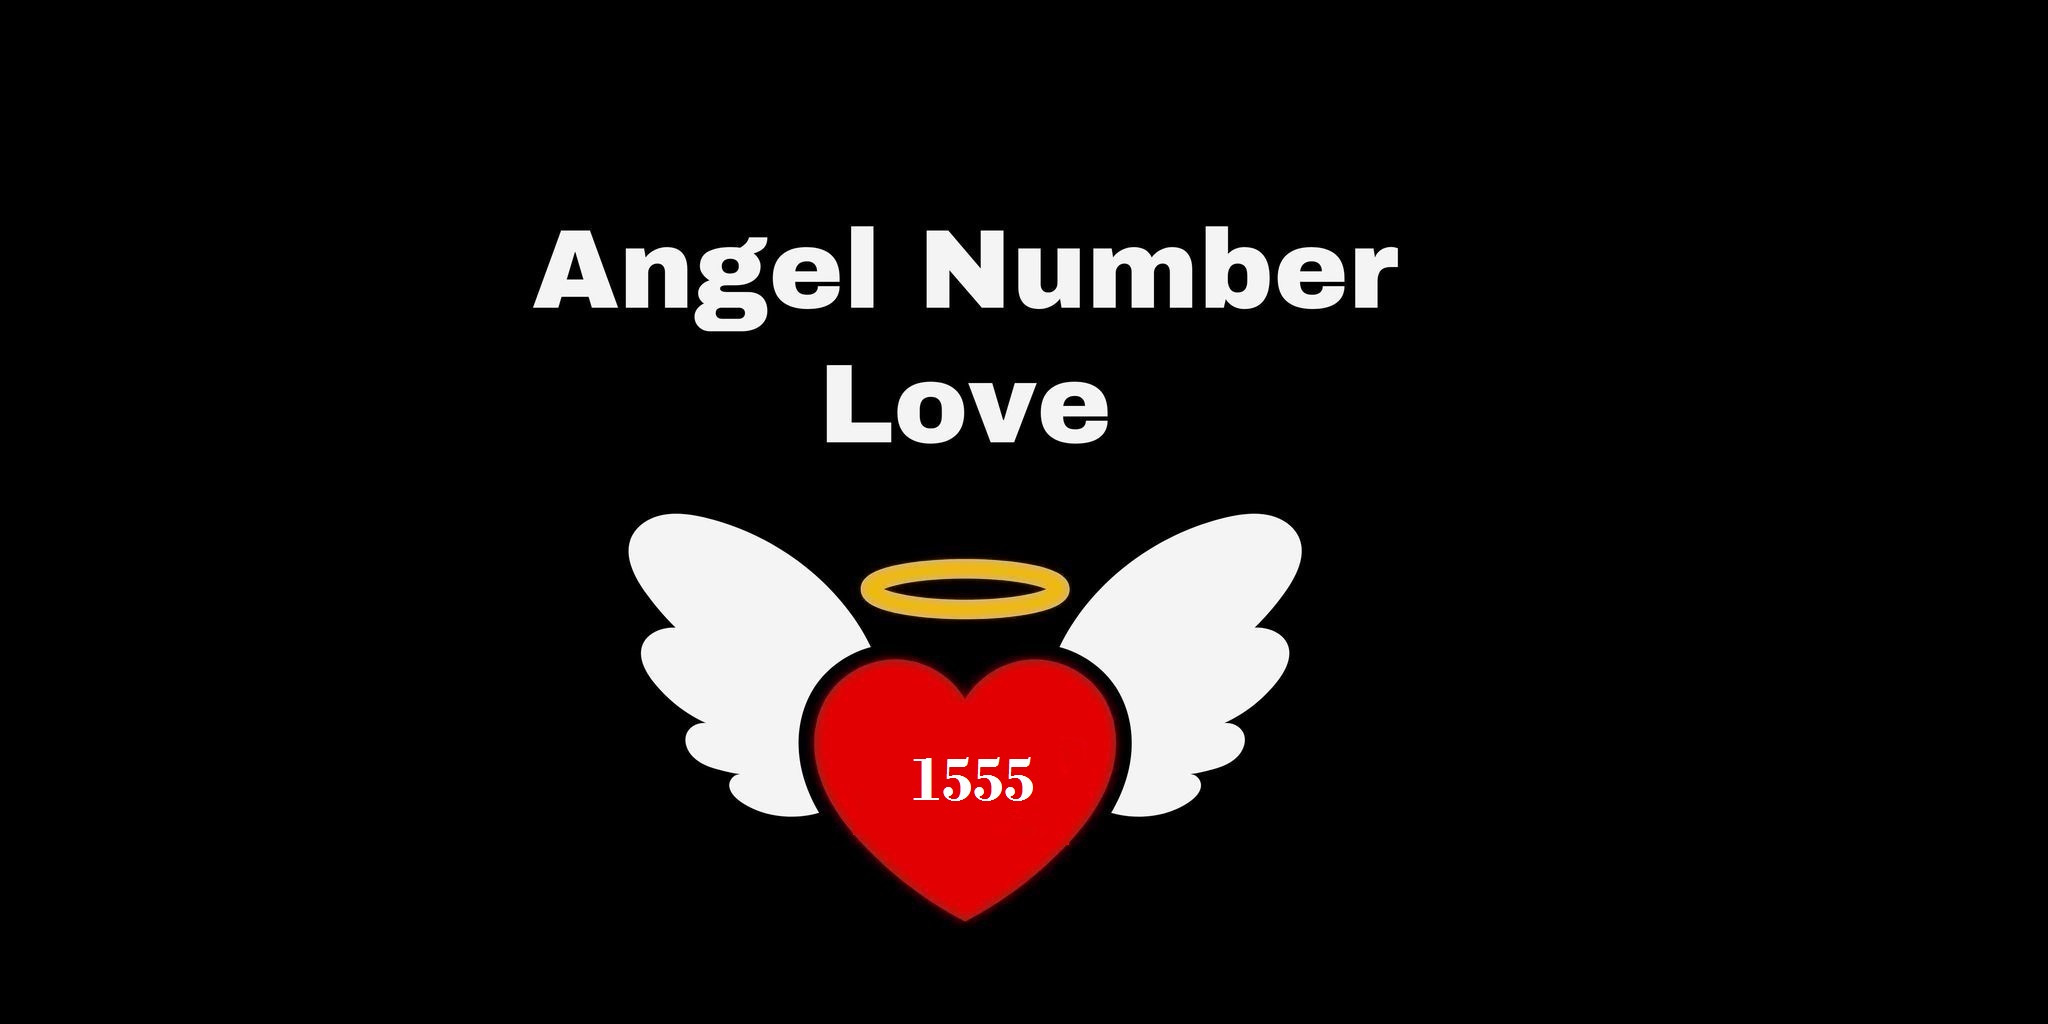 1555 Angel Number Meaning In Love